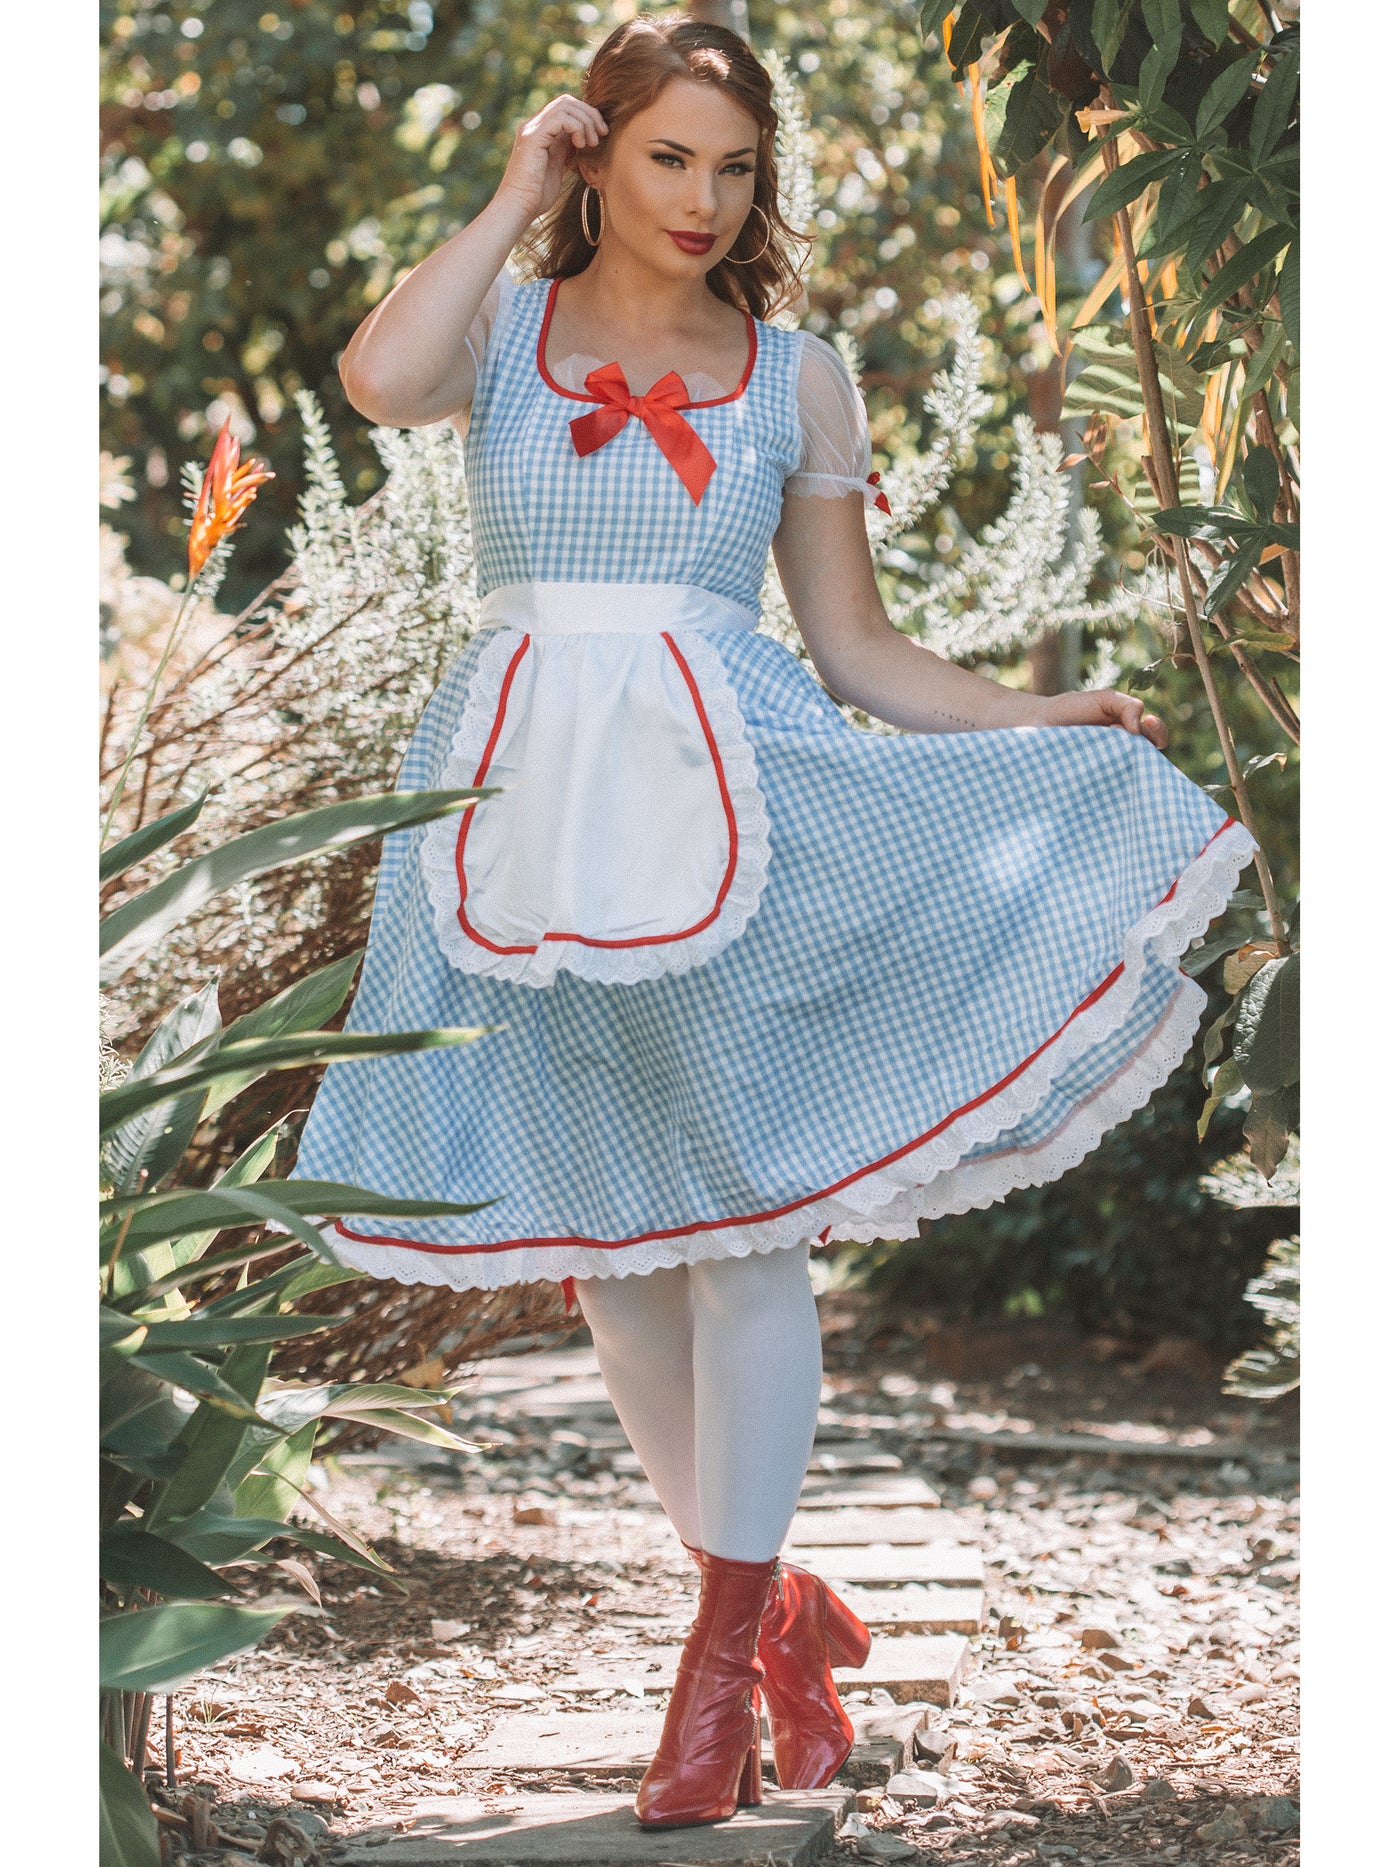 Kansas Sweetie Classic Wizard of Oz Dorothy Costume - Shop Fortune Costumes Lingerie